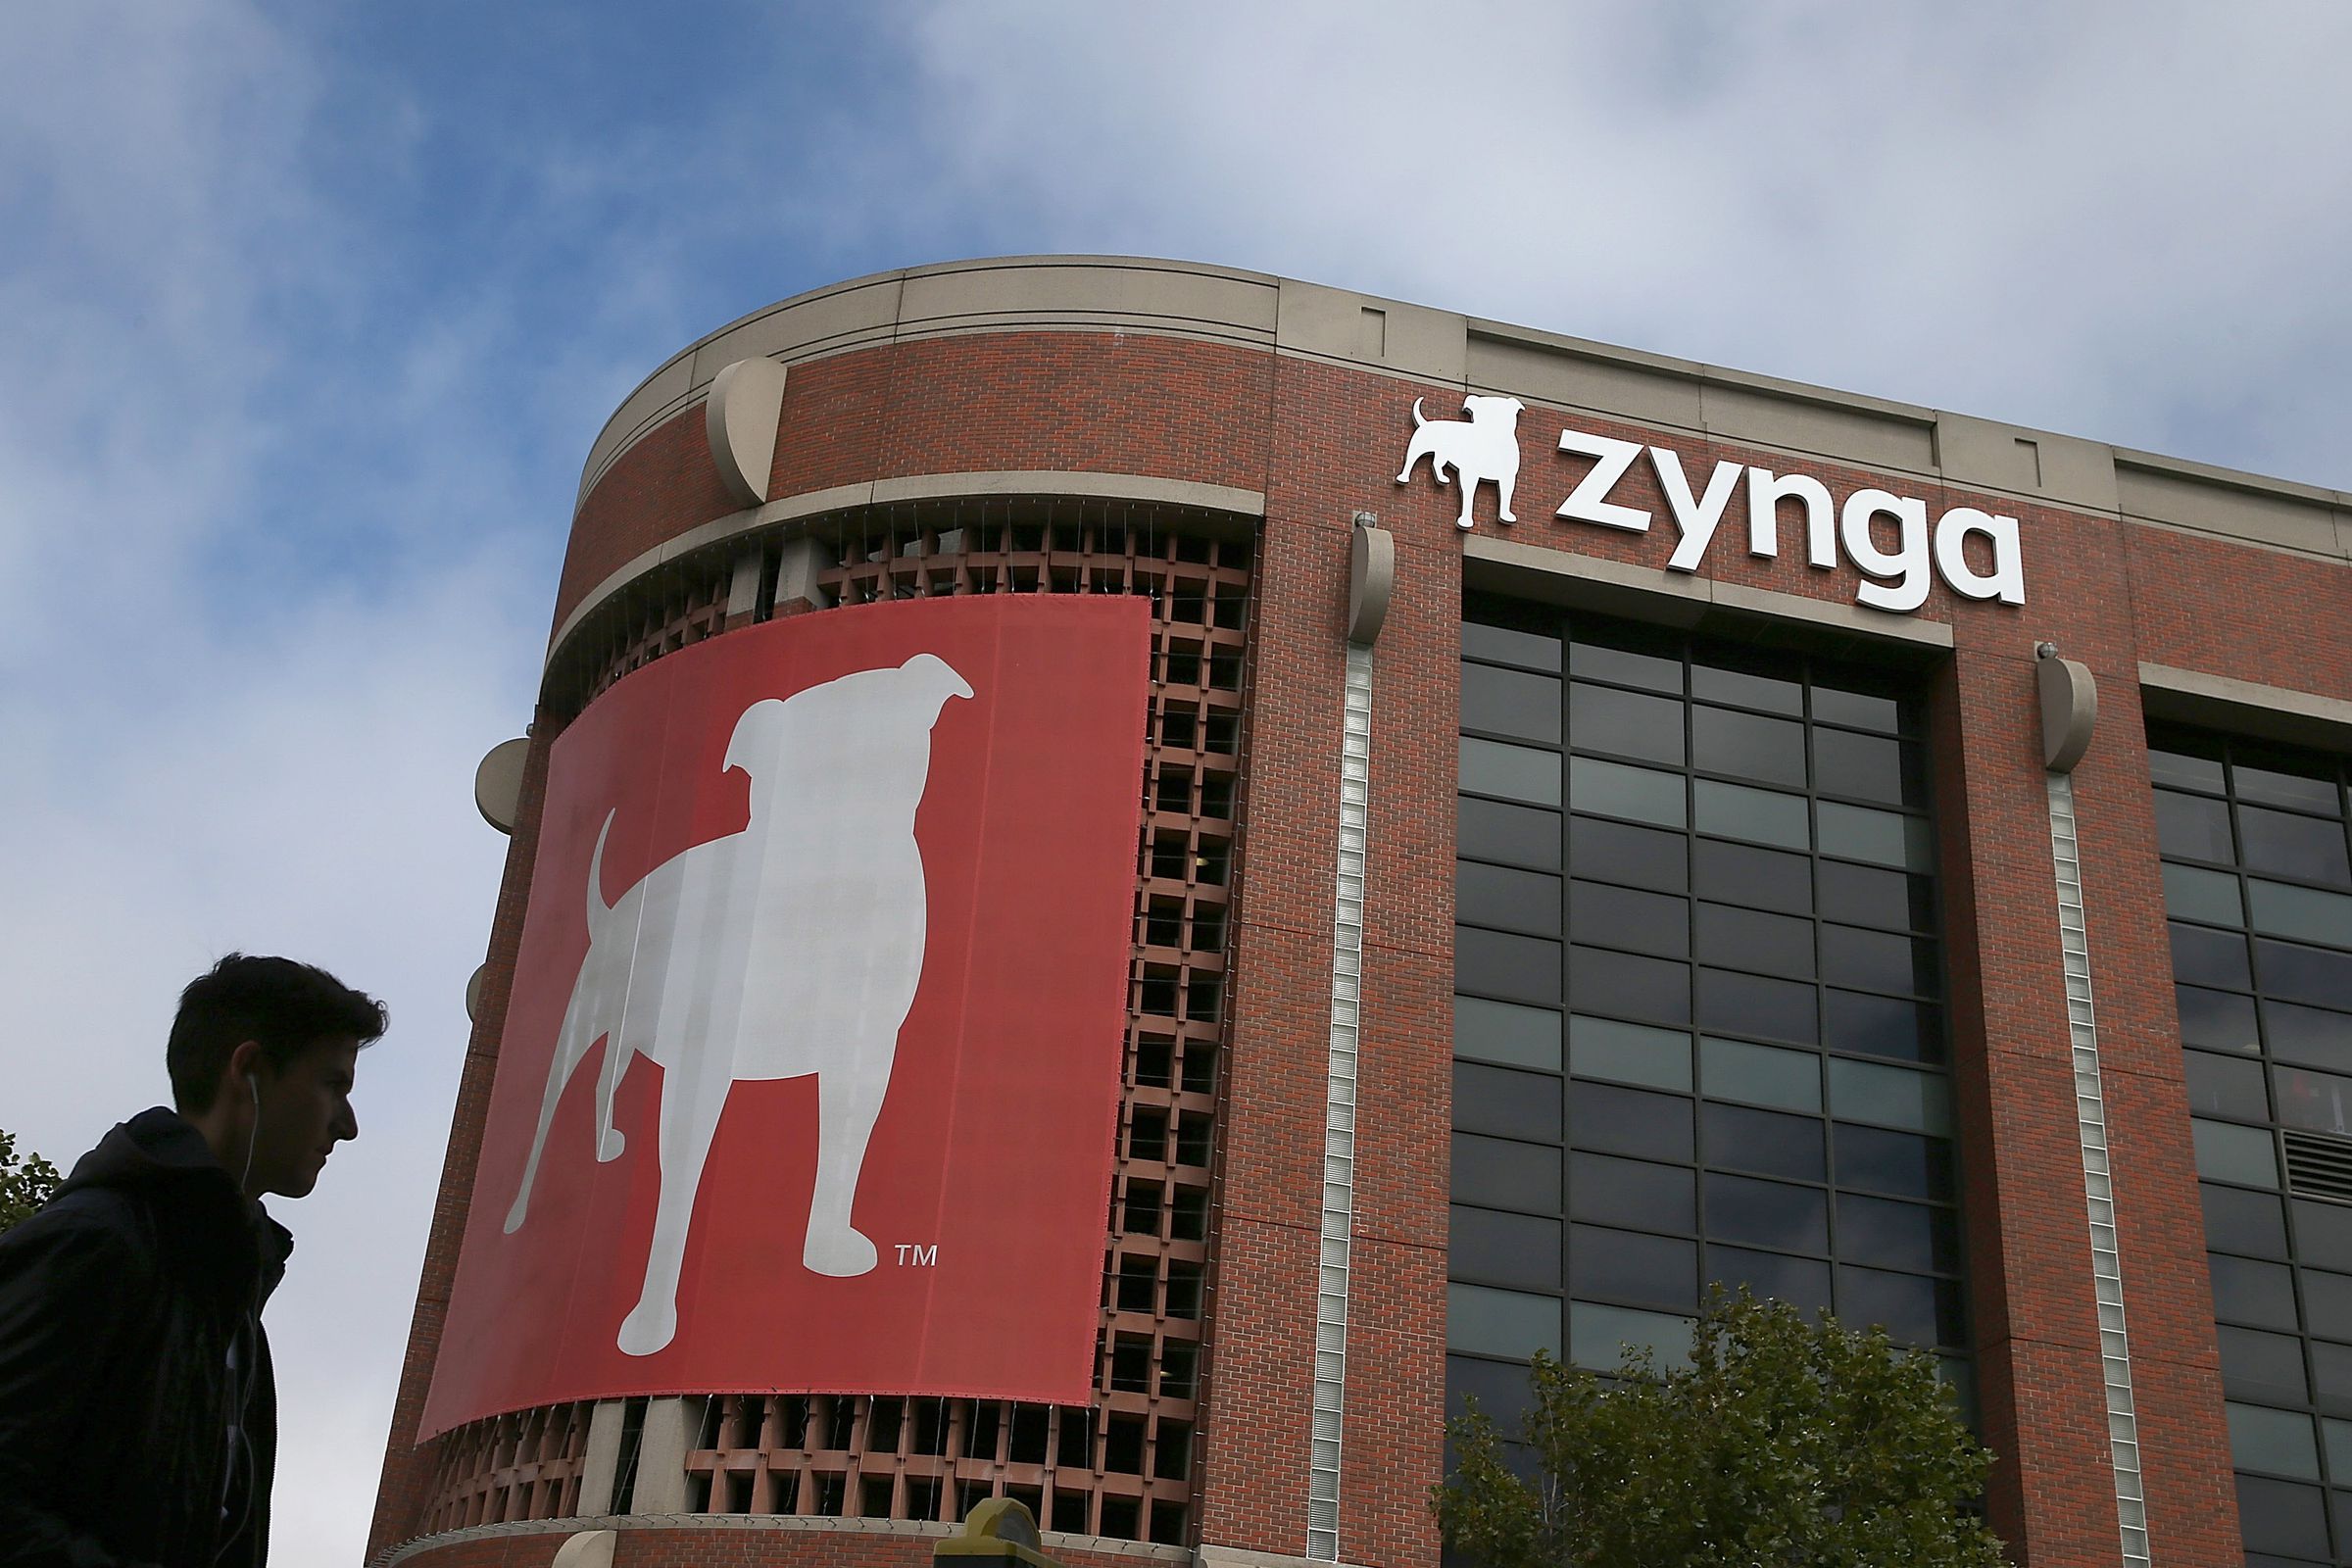 Some 170 million users of Words With Friends, and Draw Something may have been part of Zynga data breach